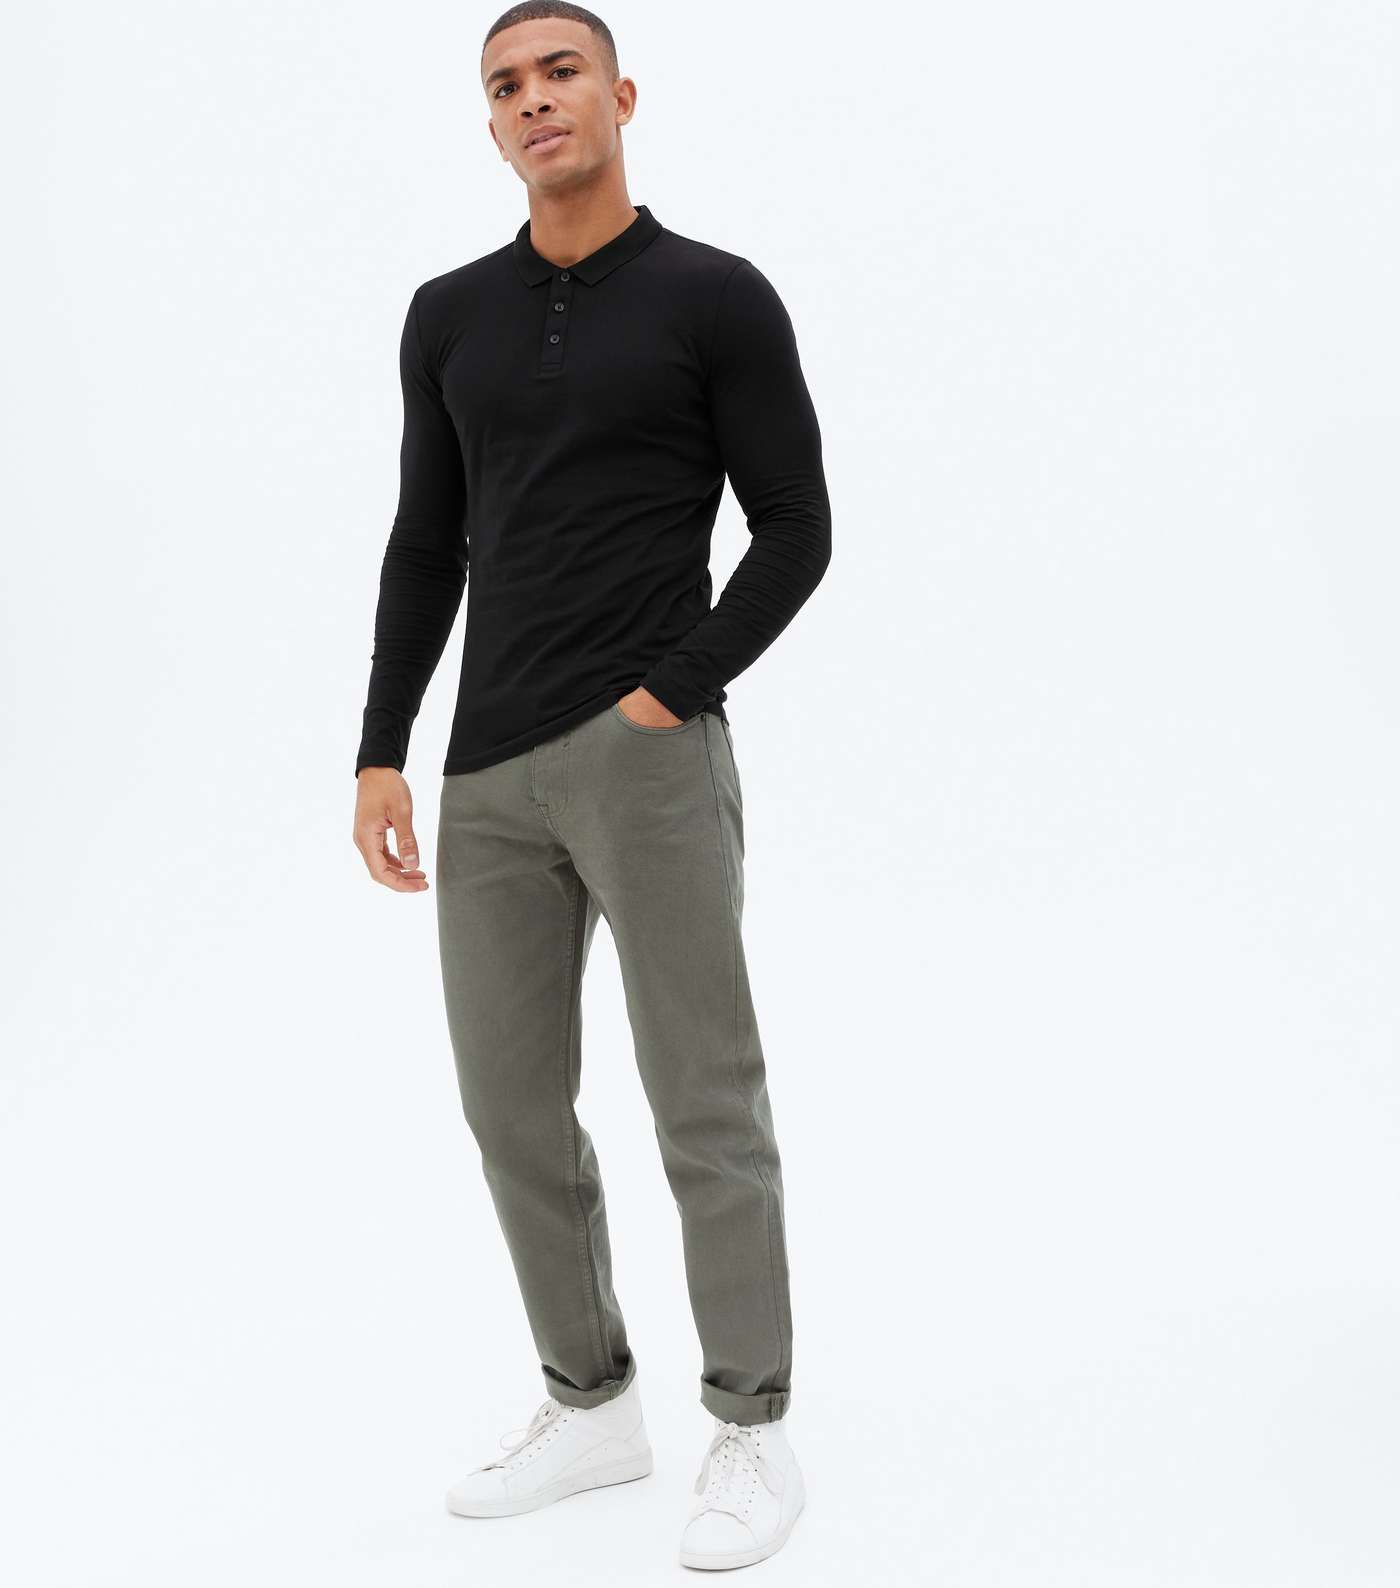 Black Long Sleeve Muscle Fit Polo Shirt Image 2